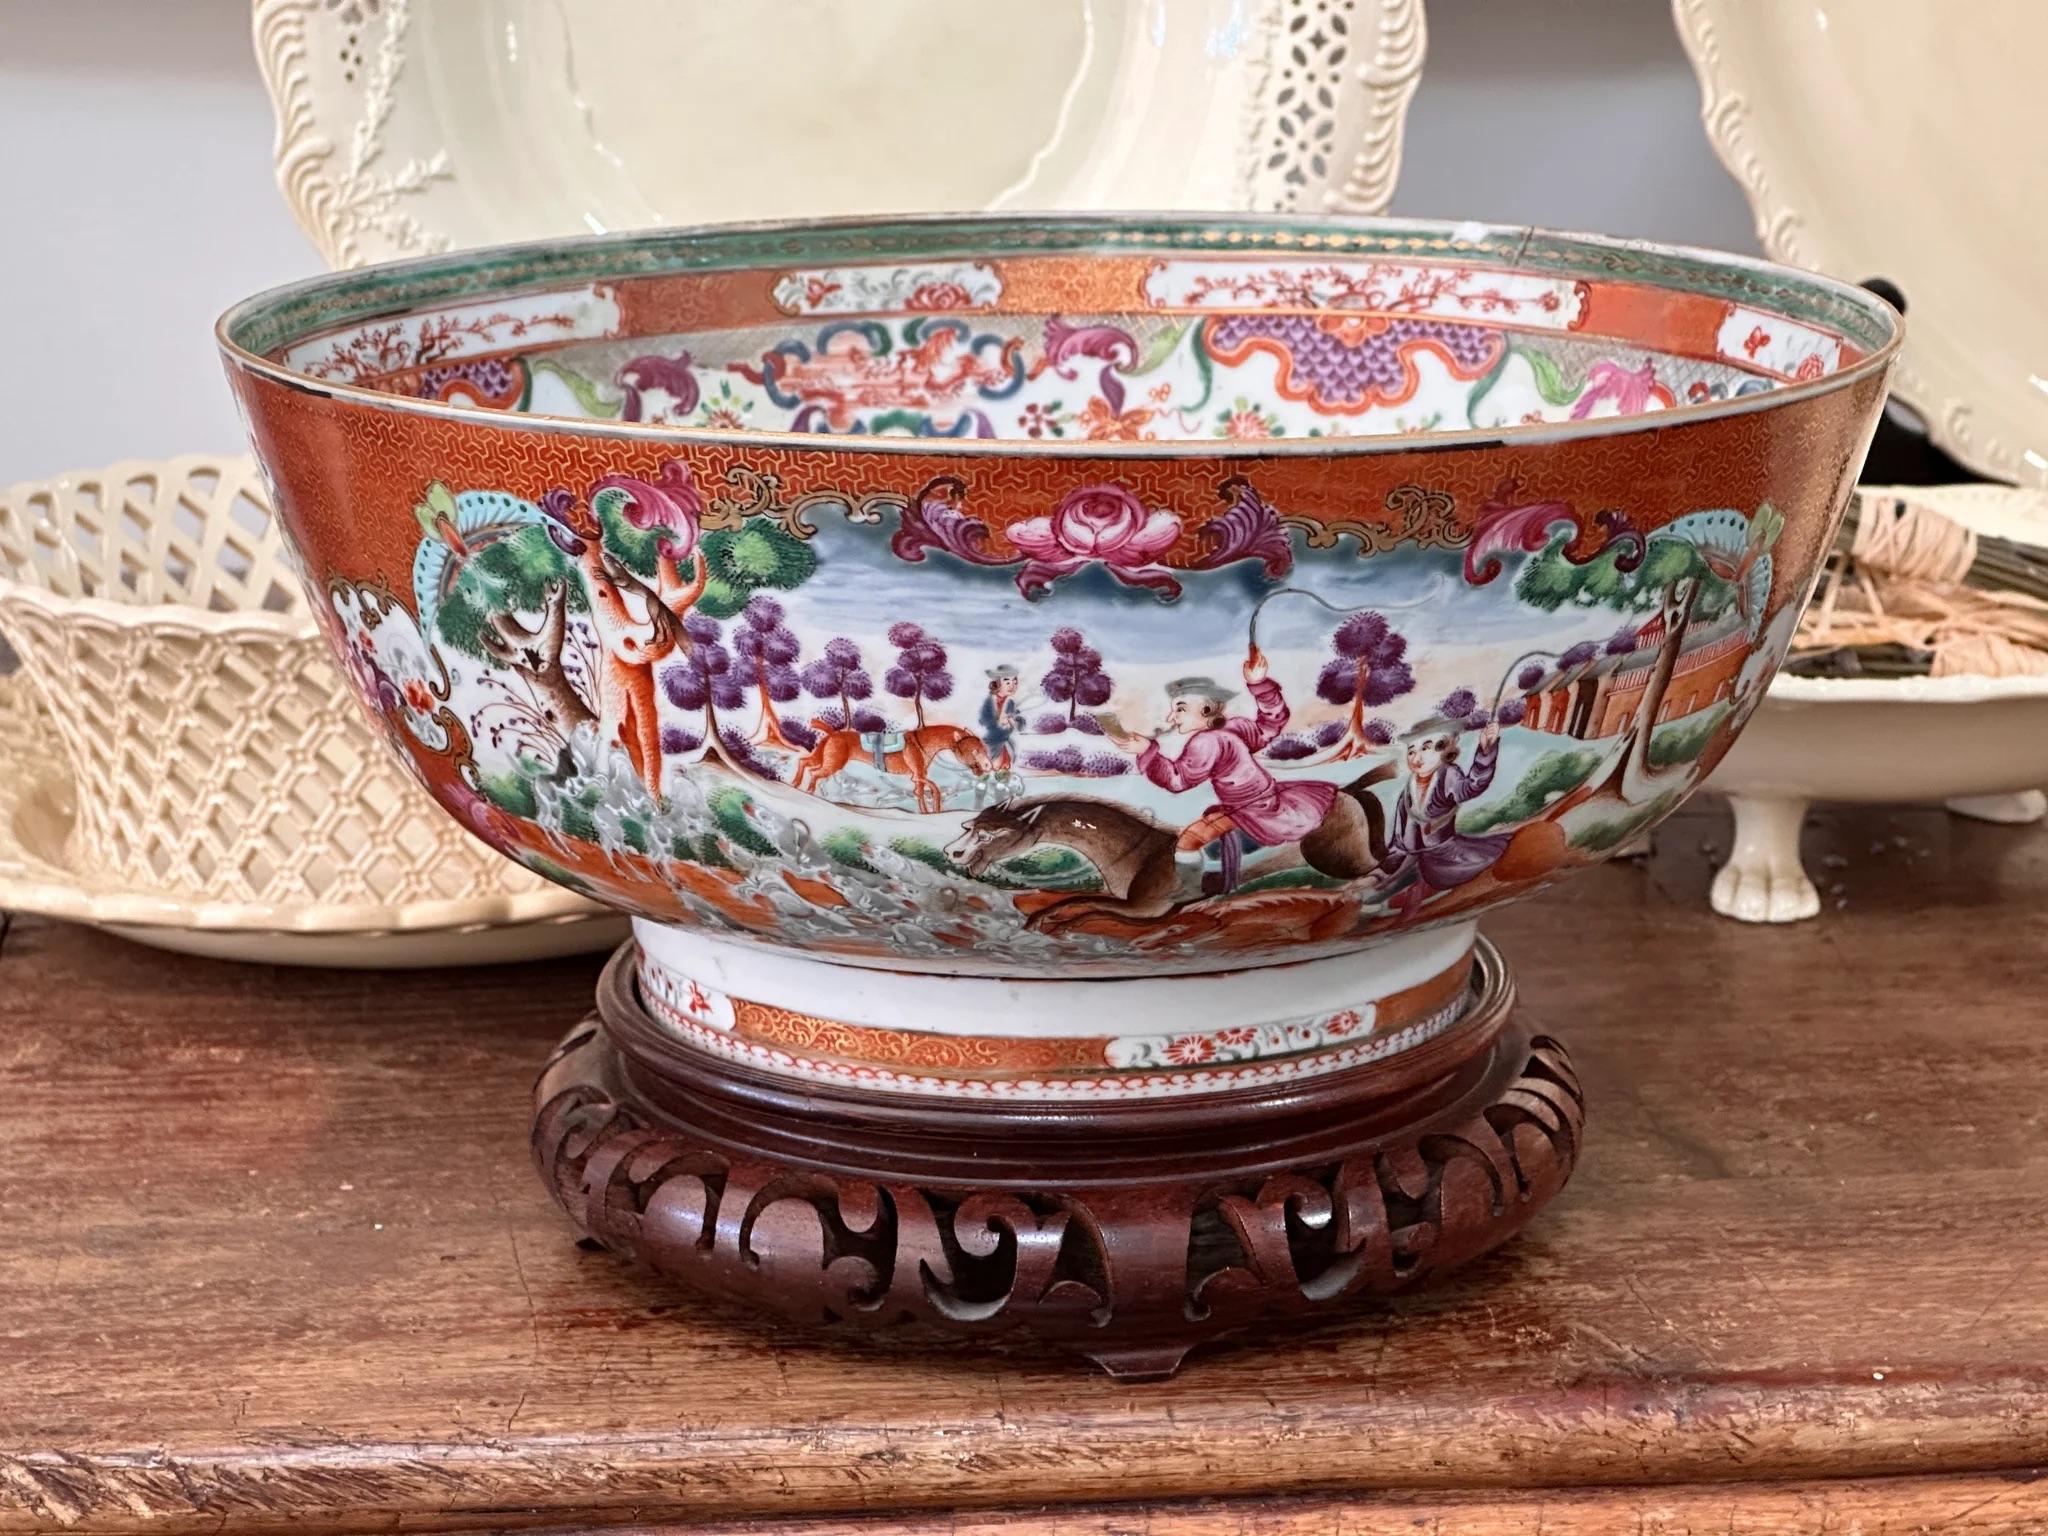 Chinese Export Porcelain Hunt Pattern Punch Bowl.  Late 18th century. Restorations. 4.75” h. x 11.25” diam. 
